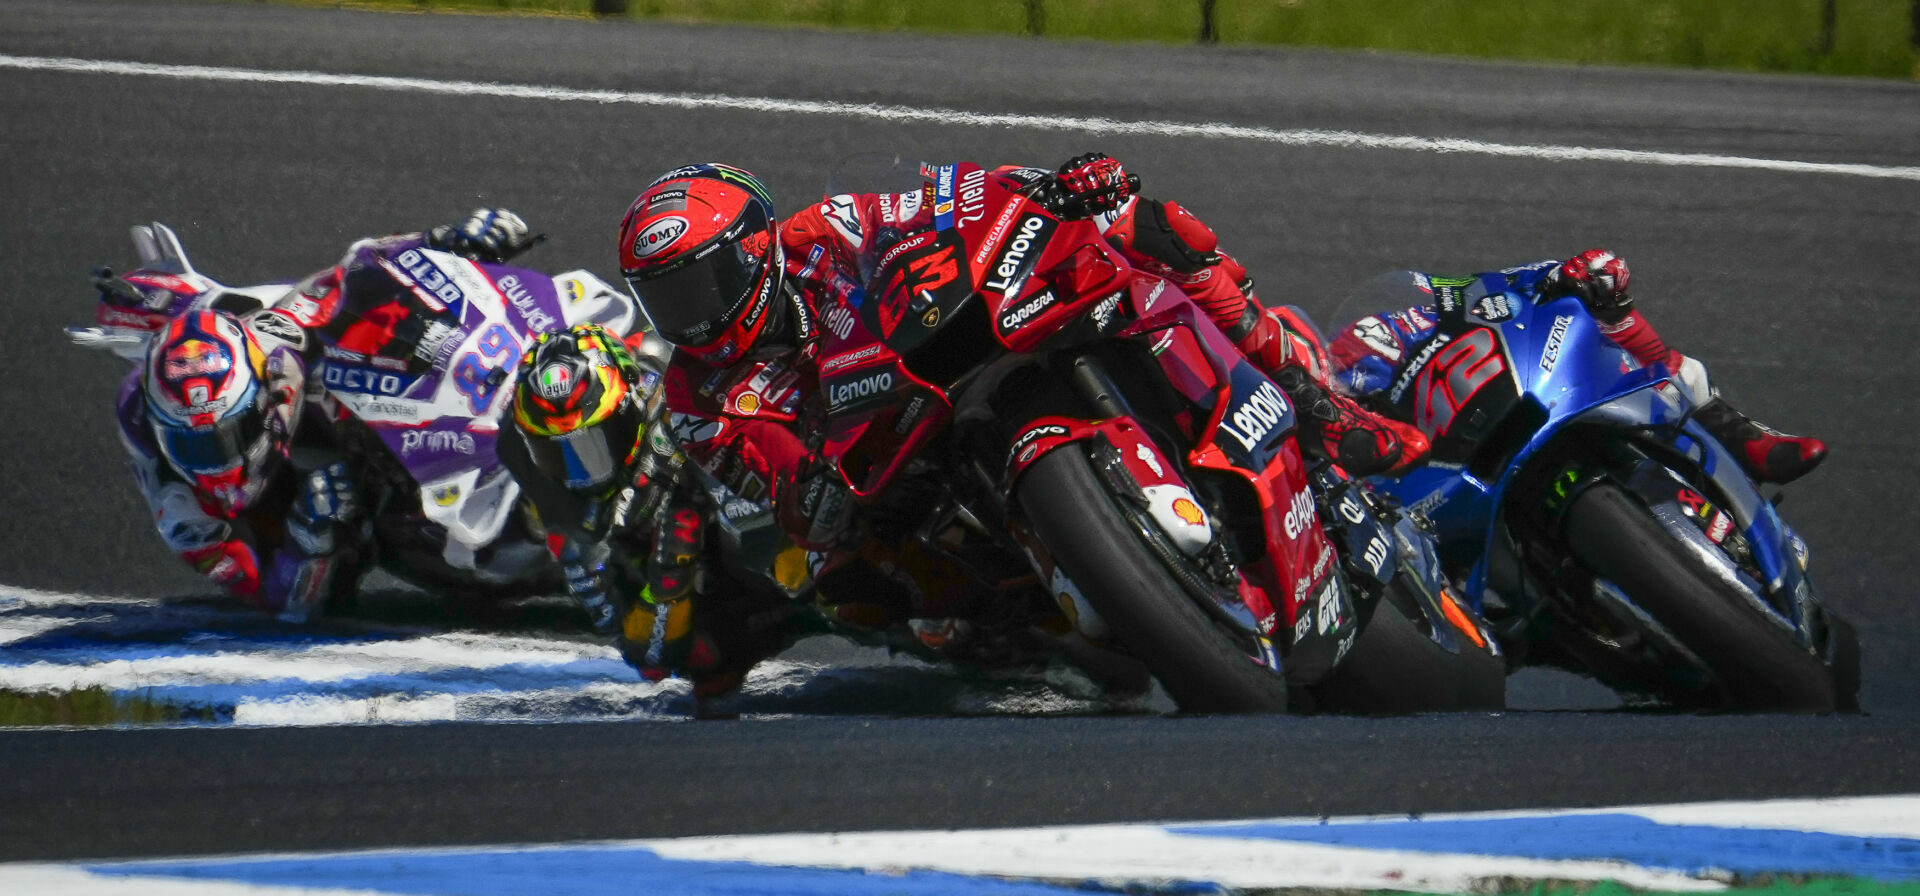 MotoGP NBC Sports Broadcasting All 21 Rounds To The U.S.